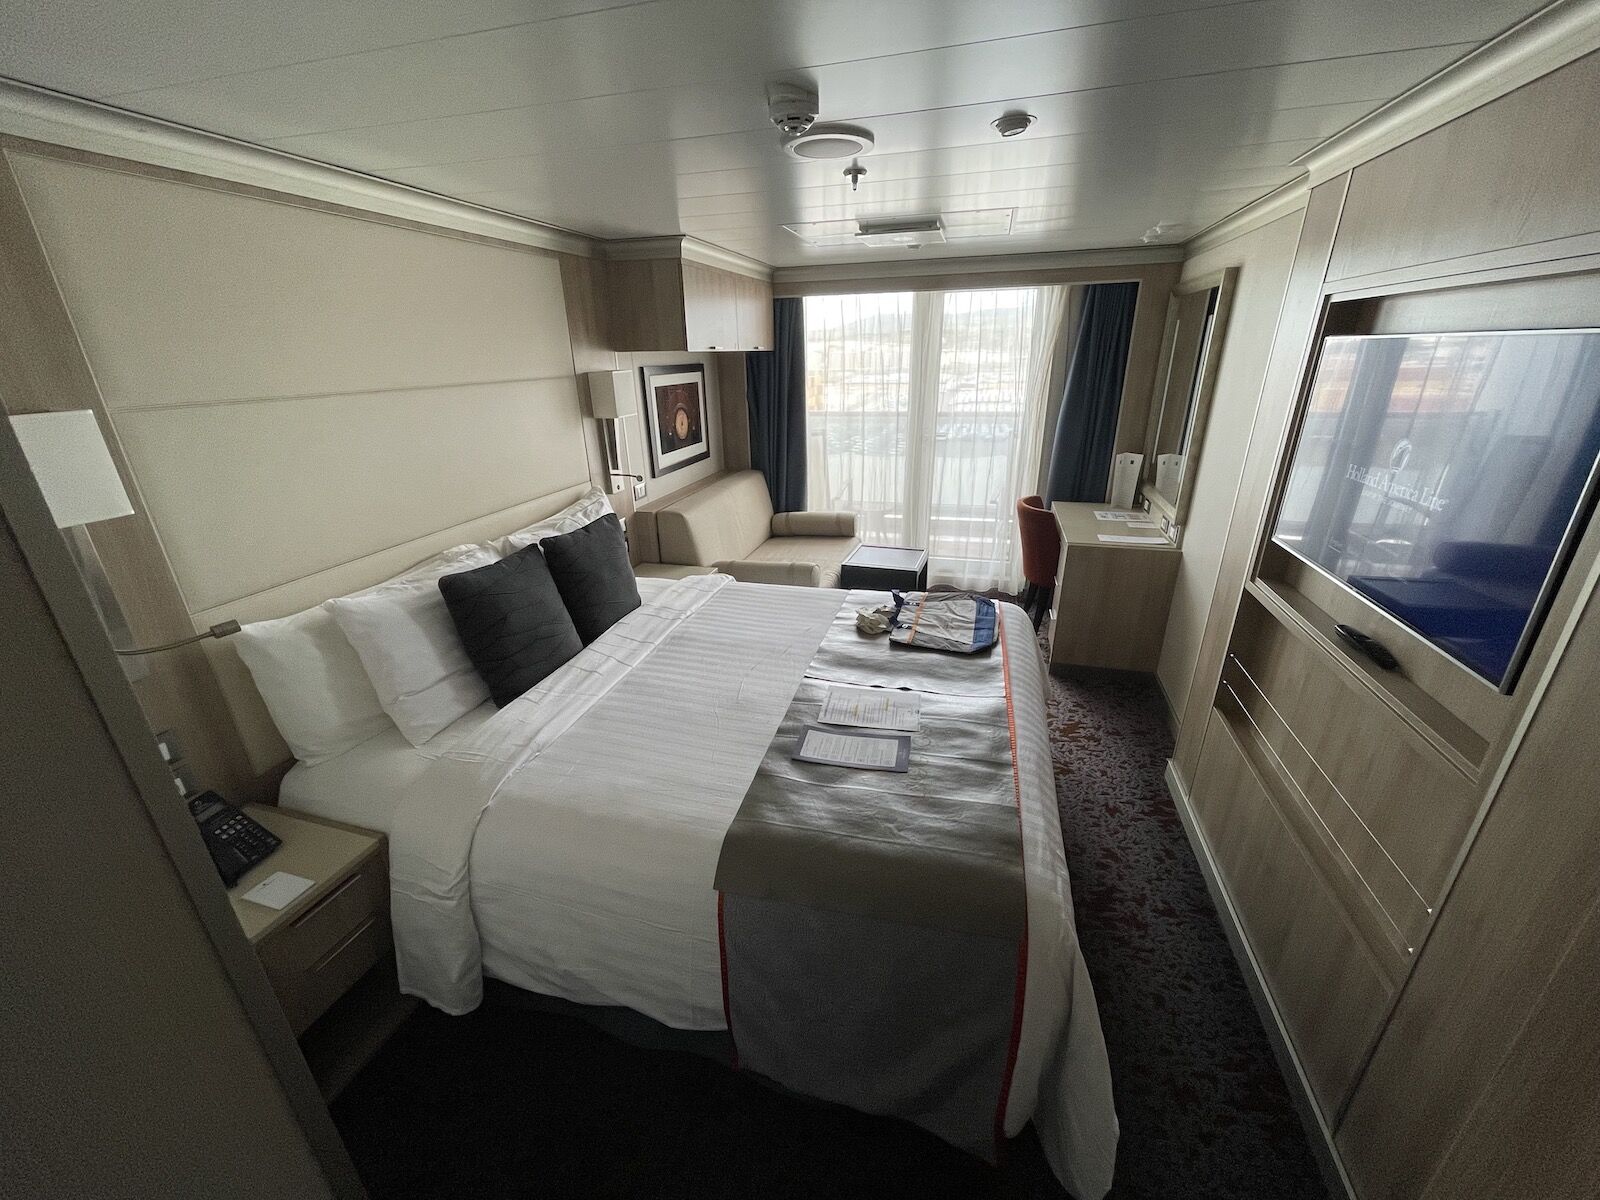 The cabin on our transatlantic cruise with Holland America.